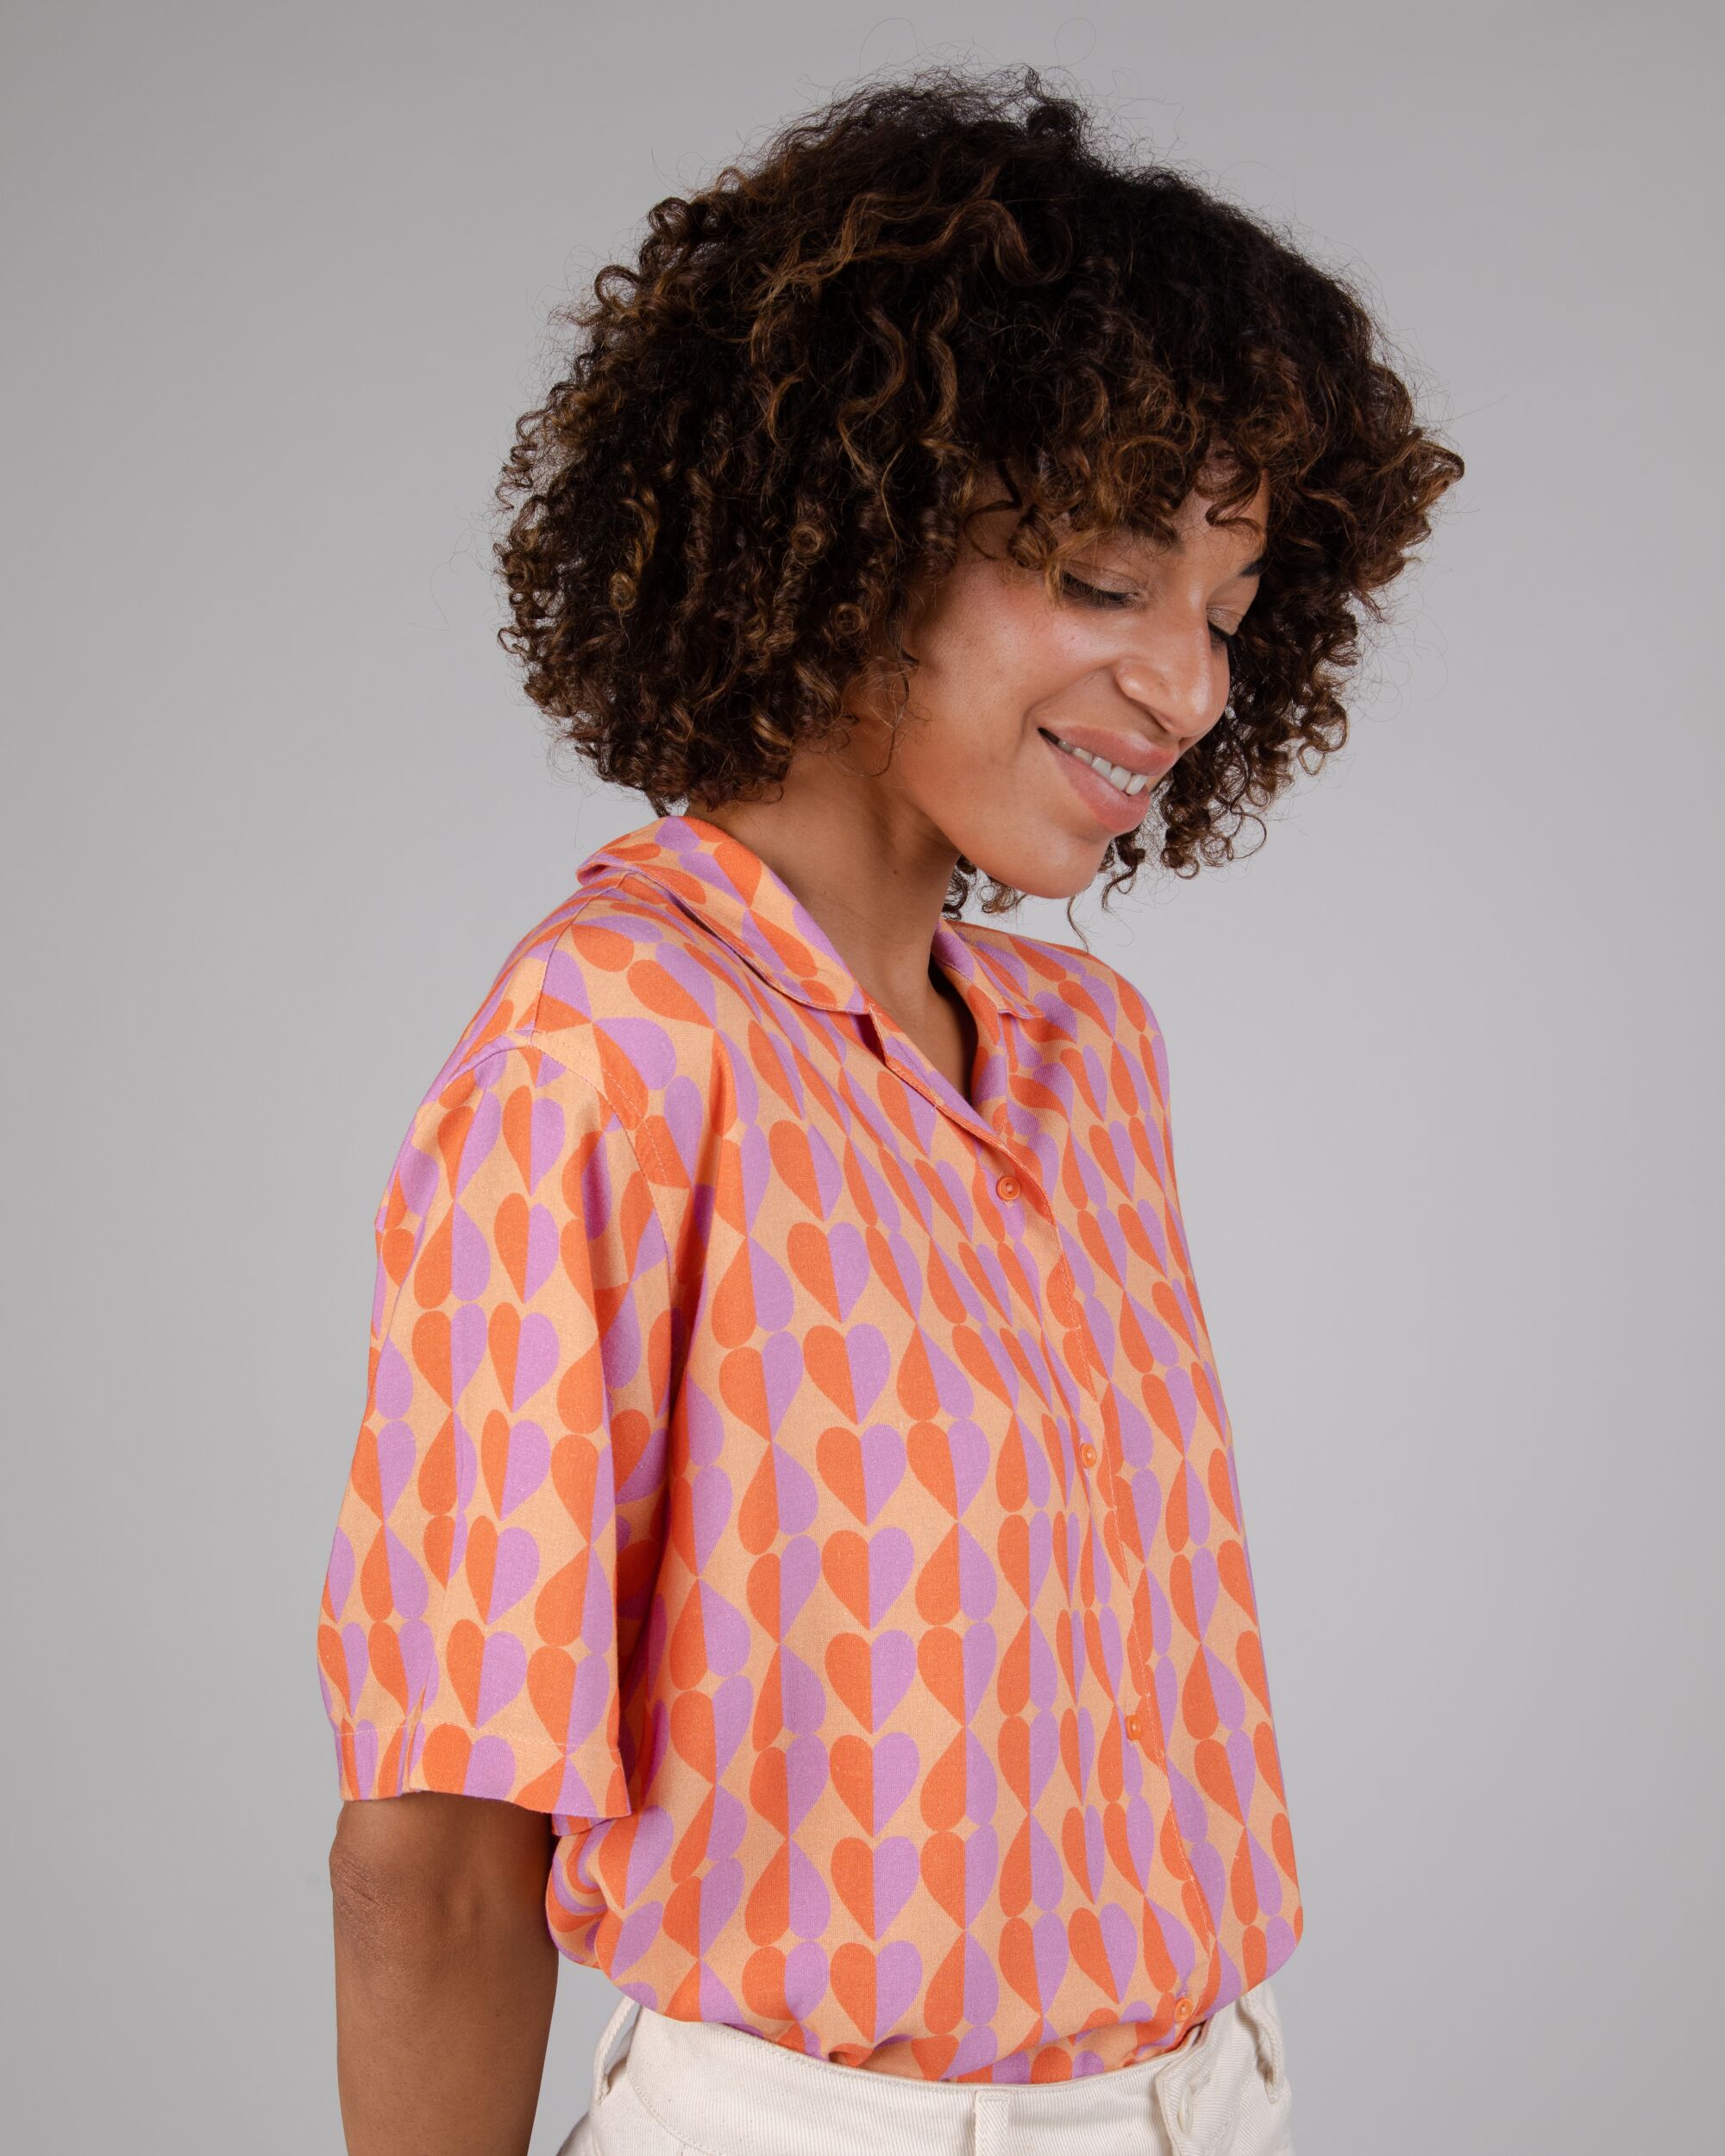 Gummie Aloha blouse in coral made of linen and viscose from Brava Fabrics